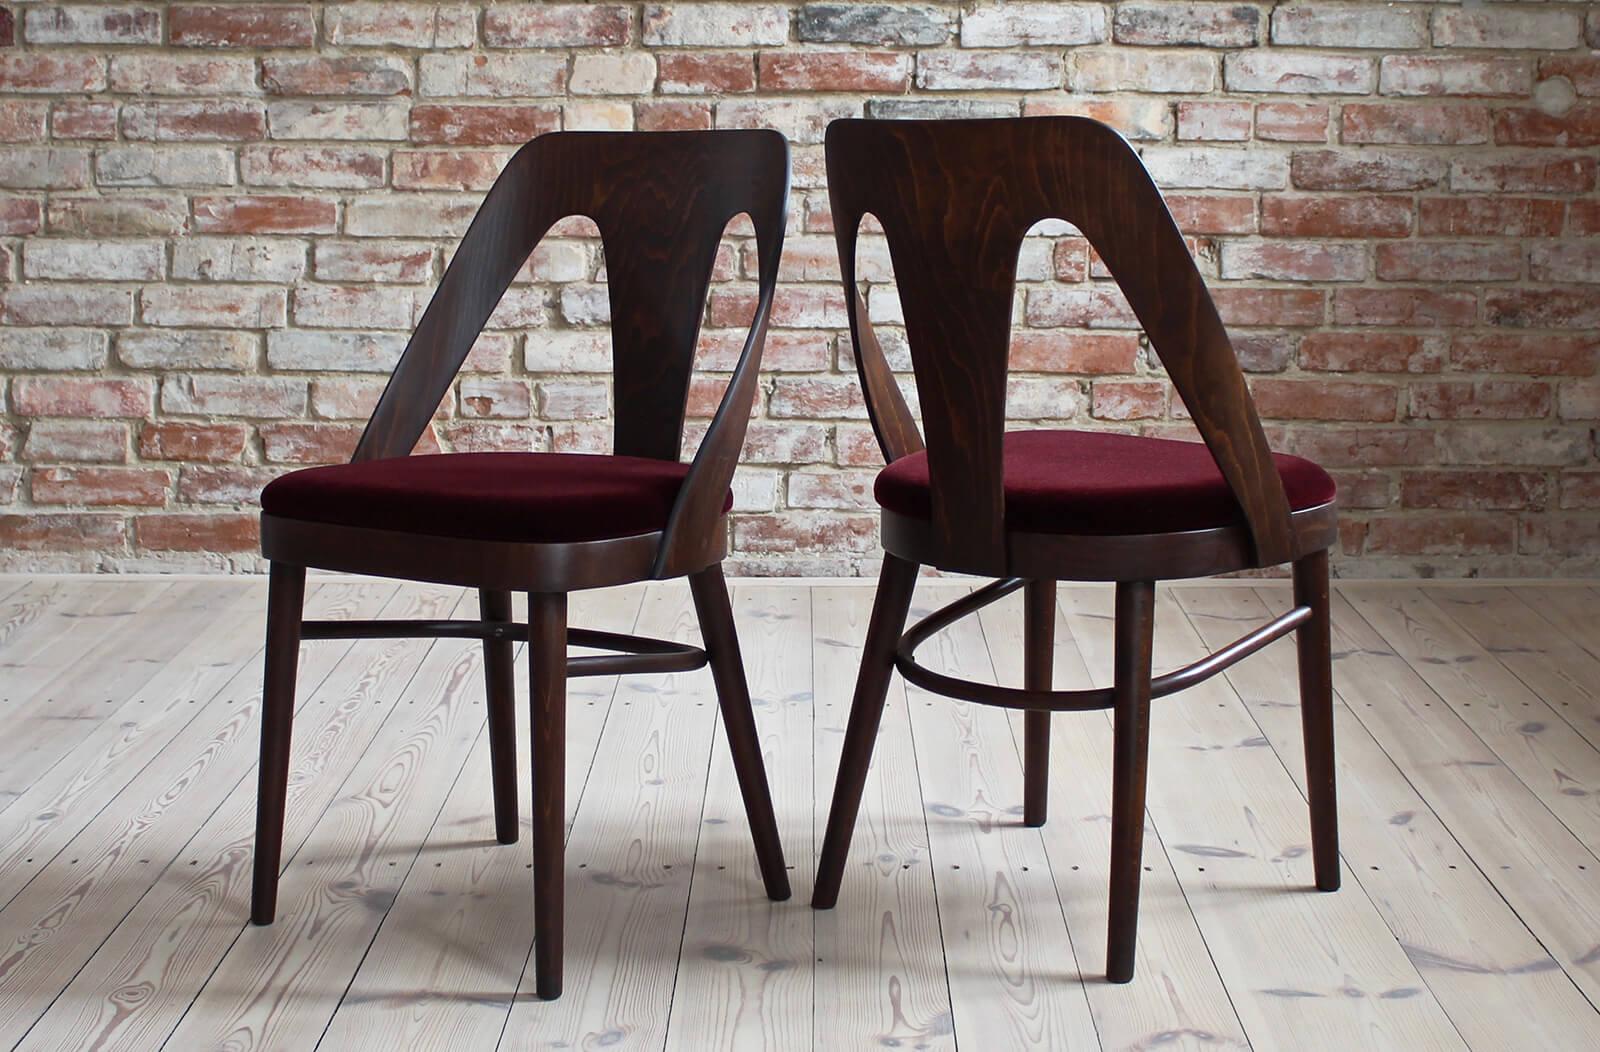 Polish Set of 8 Midcentury Dining Chairs in Burgundy Mohair by Kvadrat